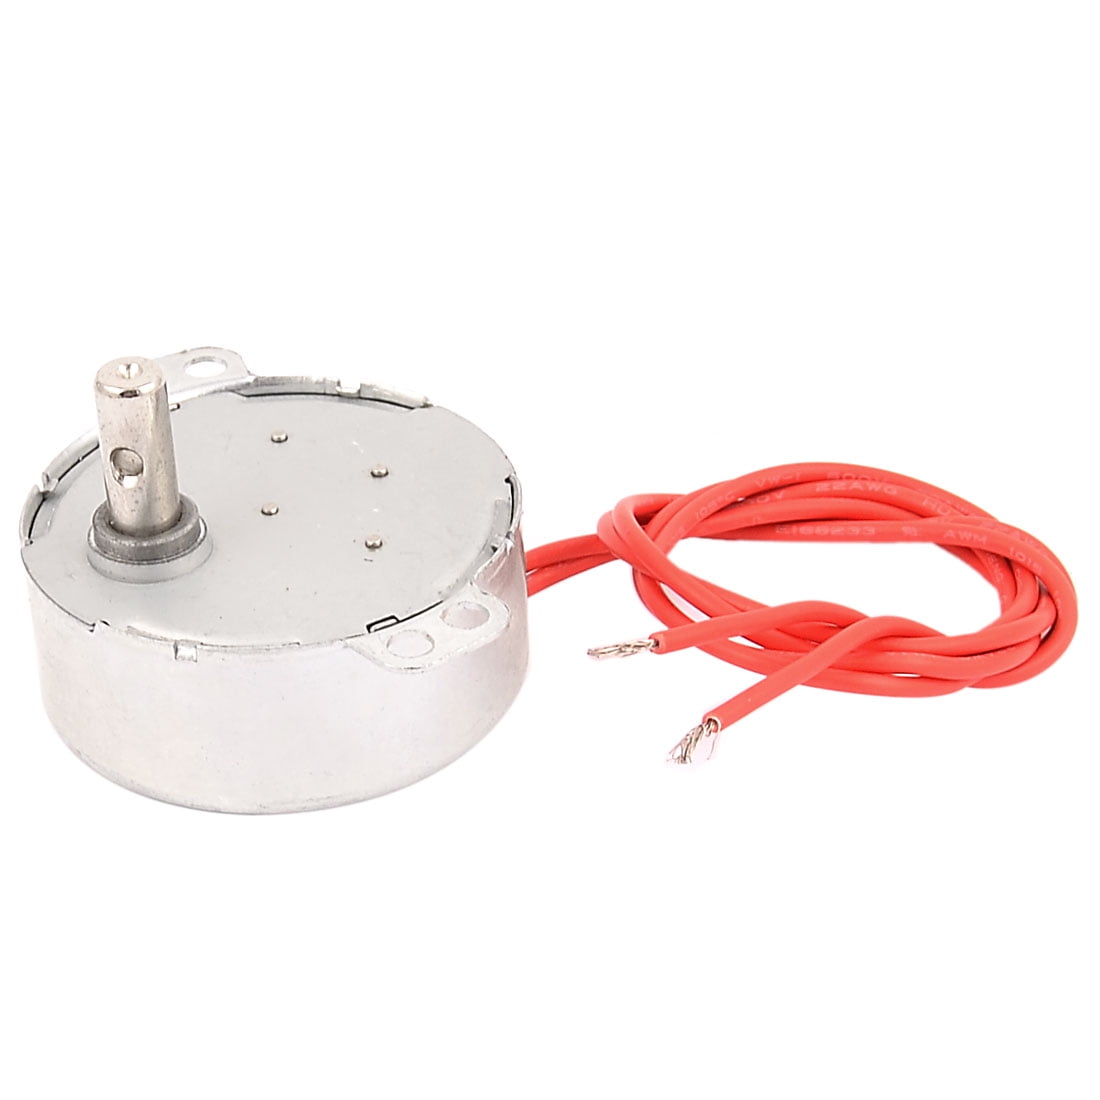 Details about   Synchronous Motor 2-2.4rpm AC 24V 4W Non-Directional CW/CCW TYC-50 for Heater 